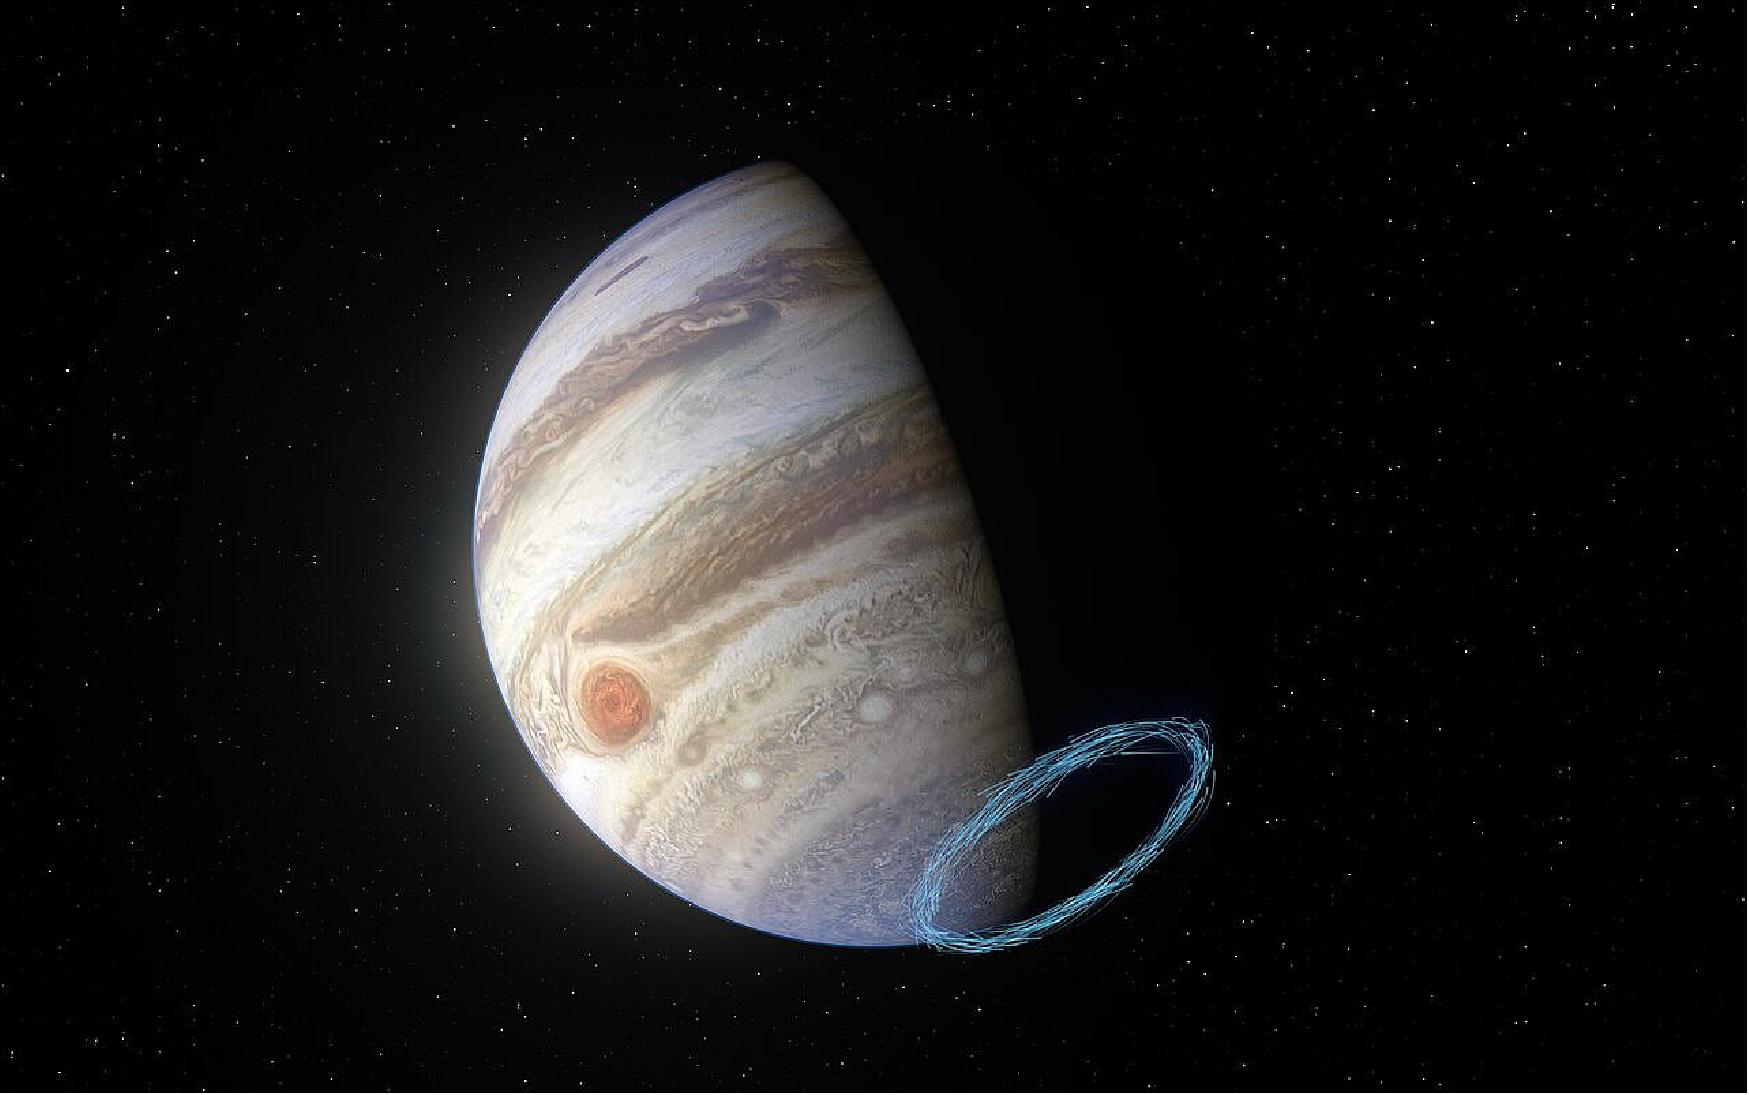 Figure 40: This image shows an artist’s impression of winds in Jupiter’s stratosphere near the planet’s south pole, with the blue lines representing wind speeds. These lines are superimposed on a real image of Jupiter, taken by the JunoCam imager aboard NASA’s Juno spacecraft. - Jupiter’s famous bands of clouds are located in the lower atmosphere, where winds have previously been measured. But tracking winds right above this atmospheric layer, in the stratosphere, is much harder since no clouds exist there. By analyzing the aftermath of a comet collision from the 1990s and using the ALMA telescope, in which ESO is a partner, researchers have been able to reveal incredibly powerful stratospheric winds, with speeds of up to 1450 km/hr, near Jupiter’s poles (image credit: ESO/L. Calçada & NASA/JPL-Caltech/SwRI/MSSS)